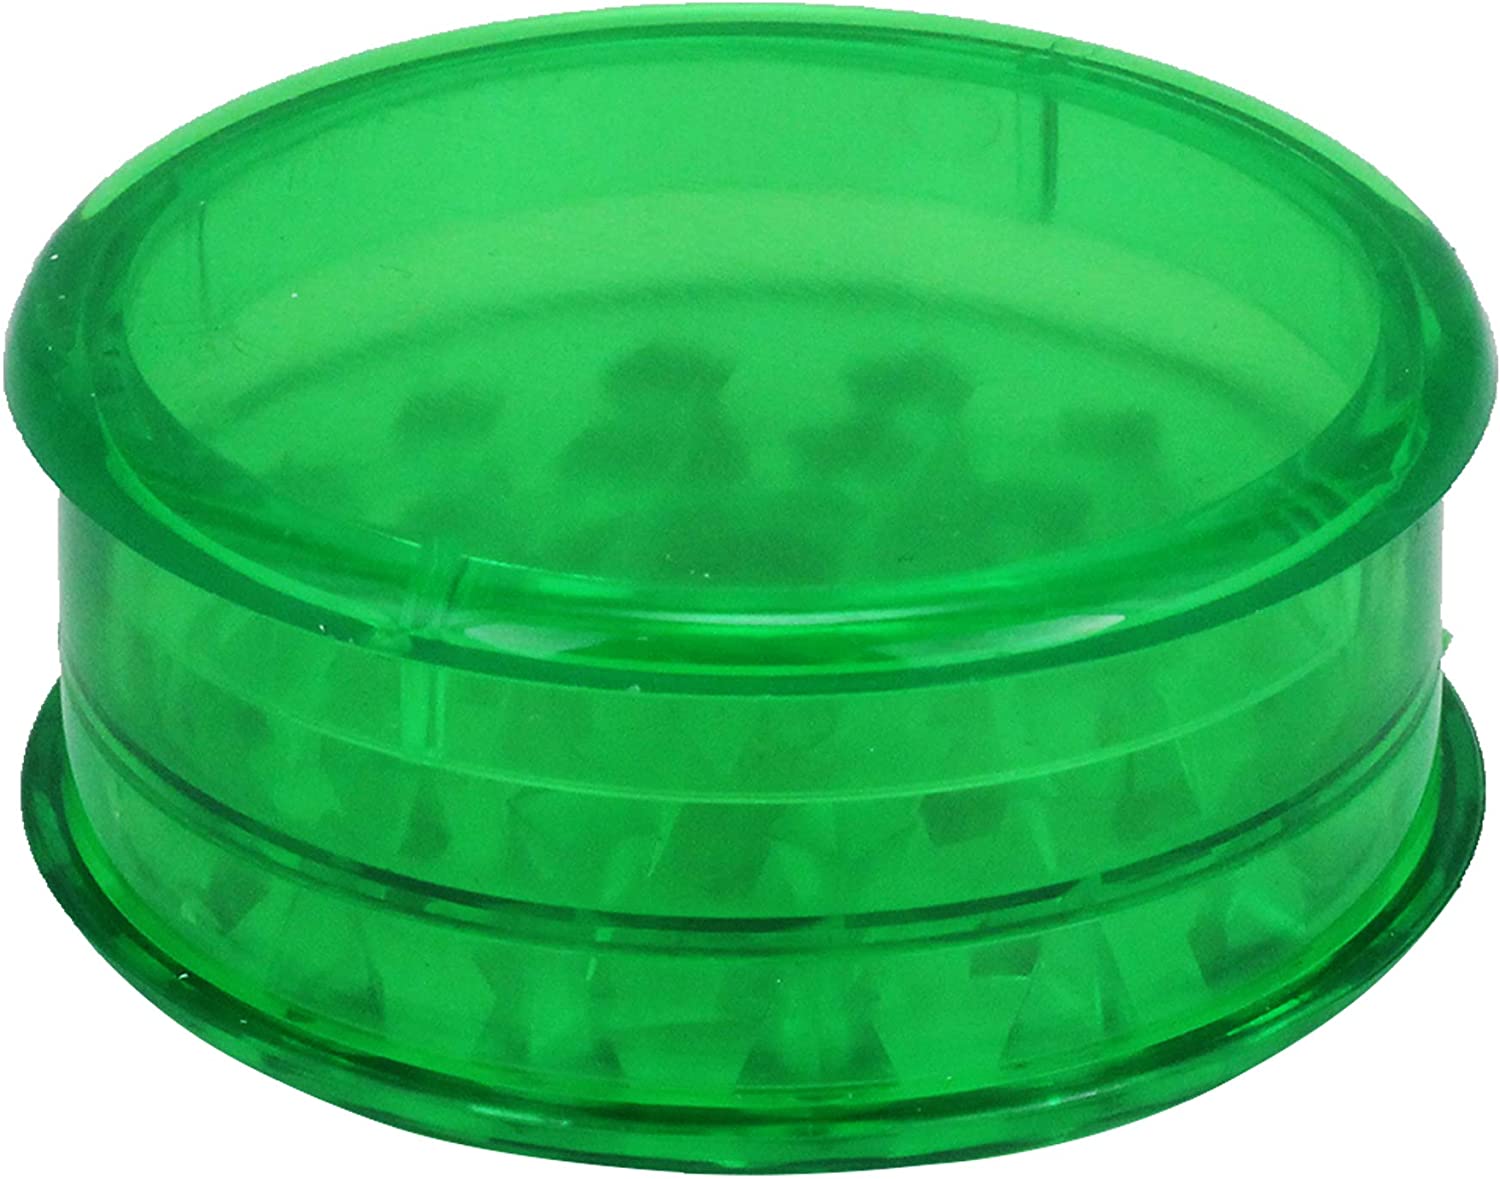 Spliff 1 x grinder plastic 60 mm for tobacco and herb three parts including storage Choose your favourite colour (green)